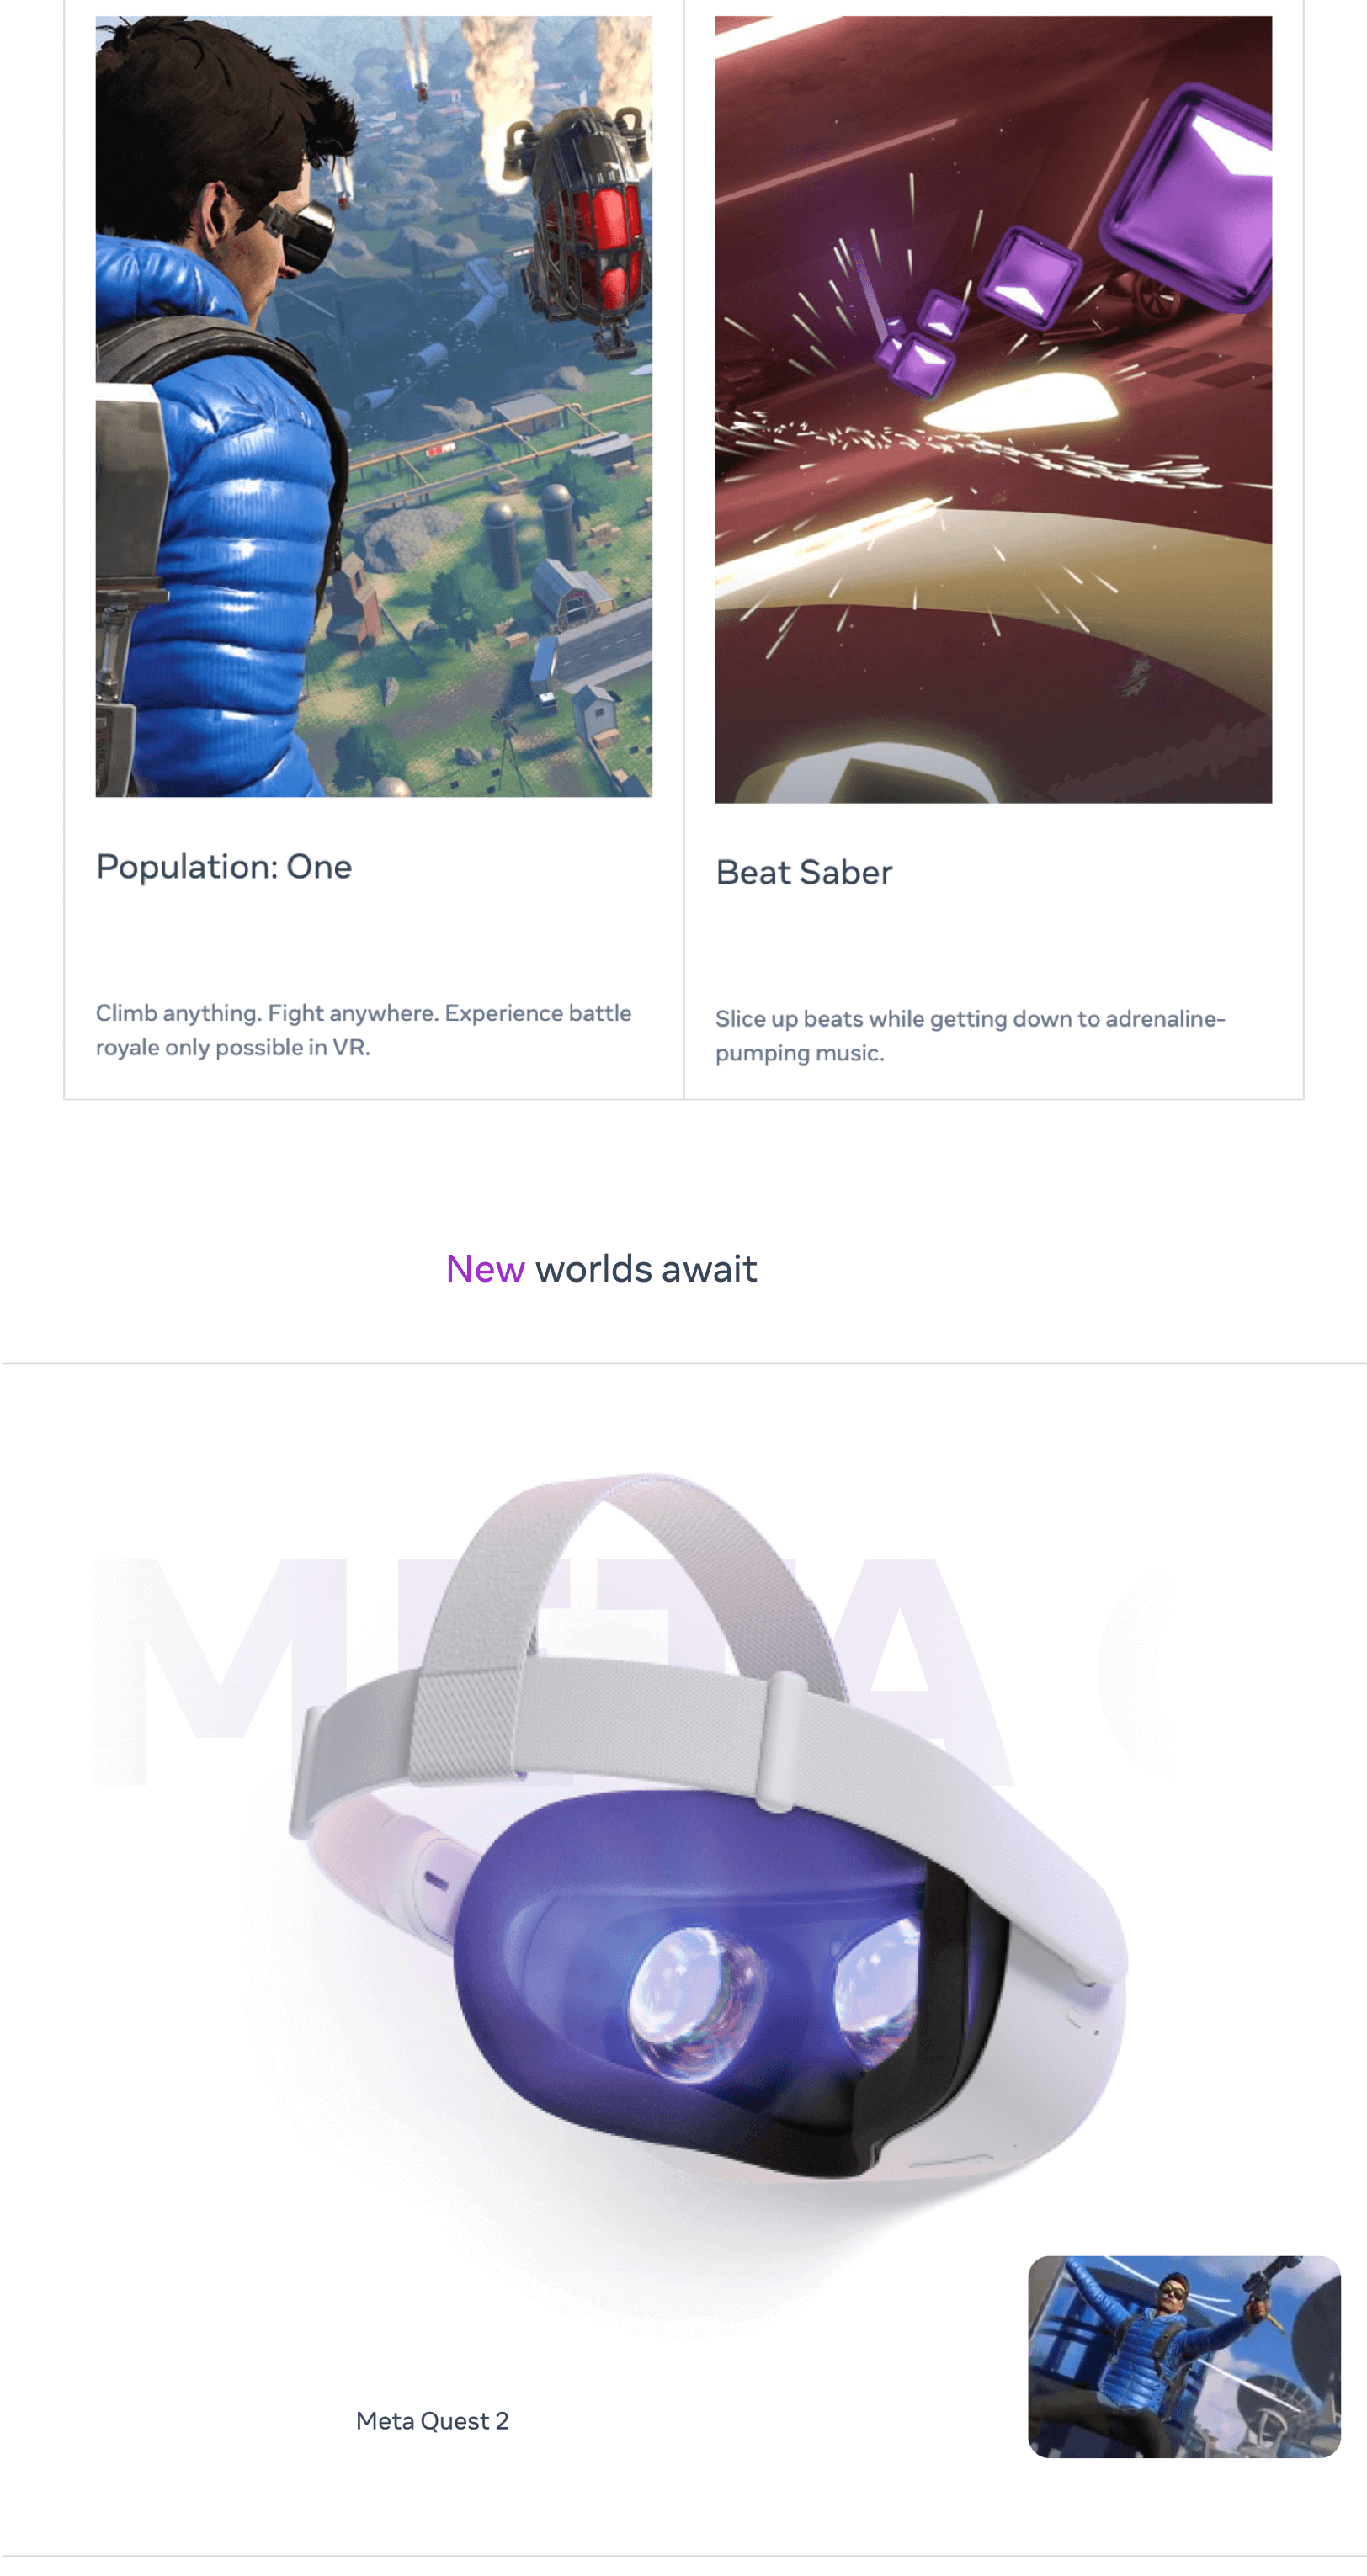 Meta Quest 2 Advanced All-In-One Virtual Reality Headset